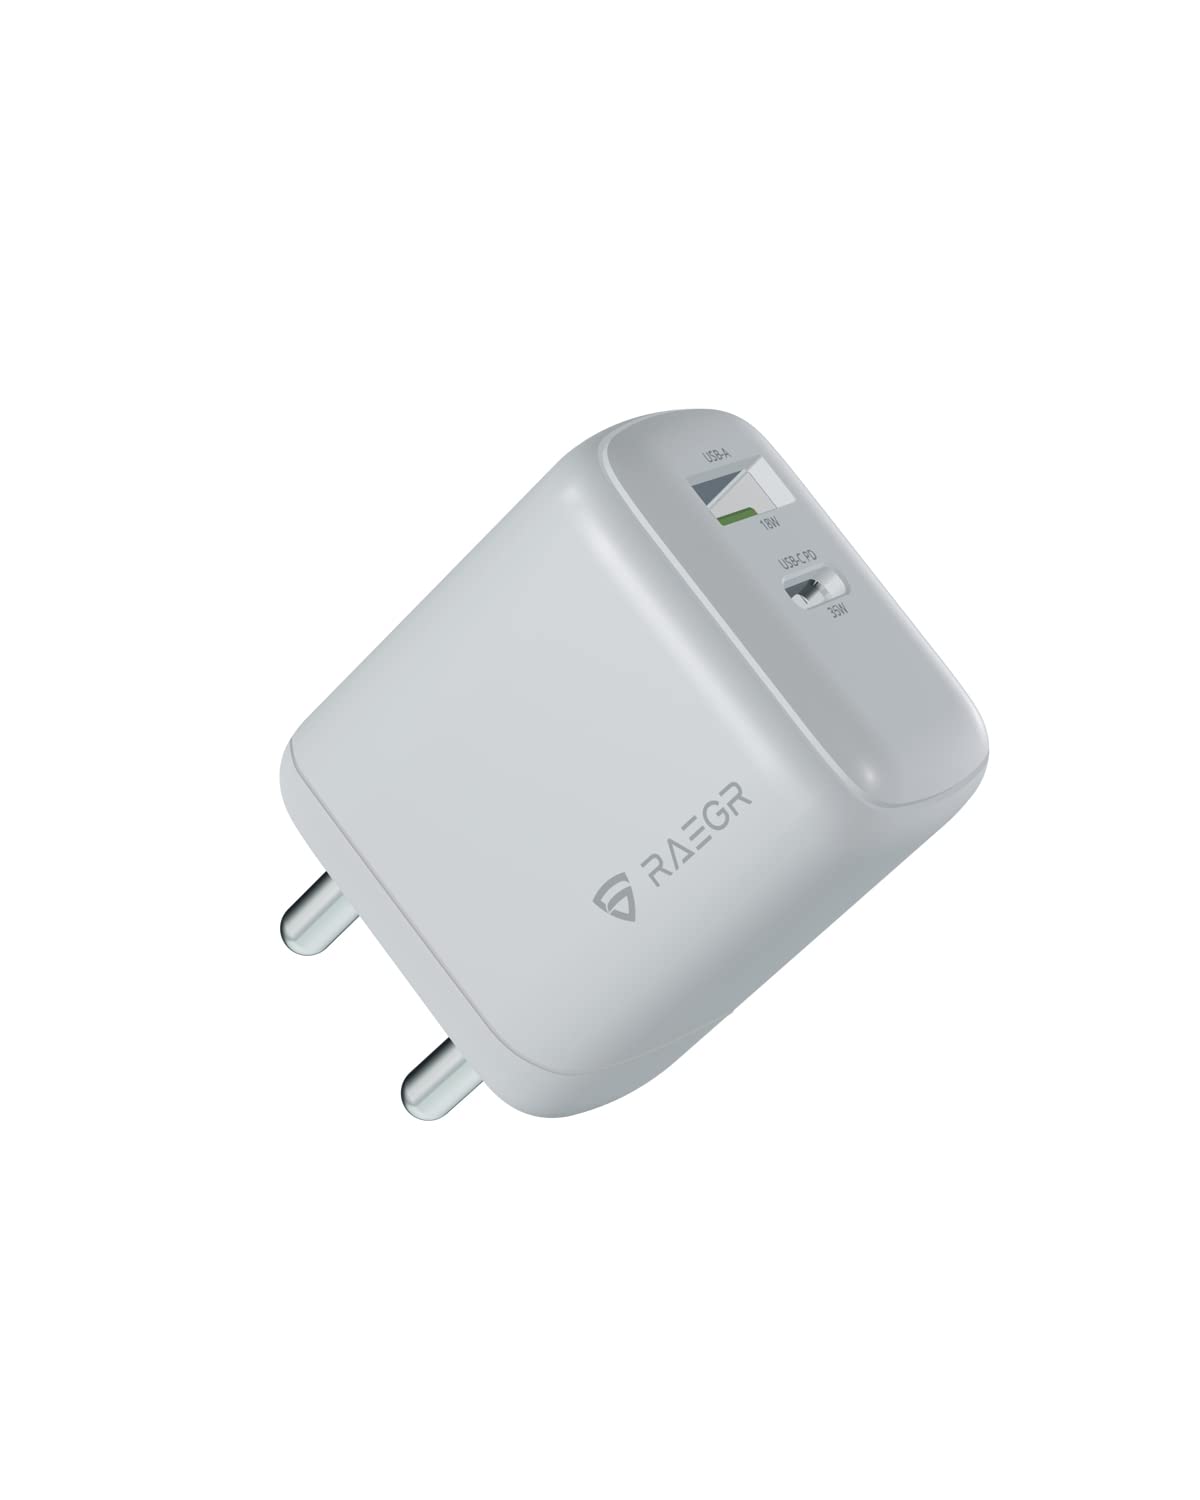 RAEGR RapidLink 600, 35W GaN Fast Charger PD Adapter Powered by TAGORE TrustedGaN Technology, Type-C PD+USB-A Dual Port Wall Charger, BIS Certified, Compatible with MacBook Air, Phones, iPad, Tablets